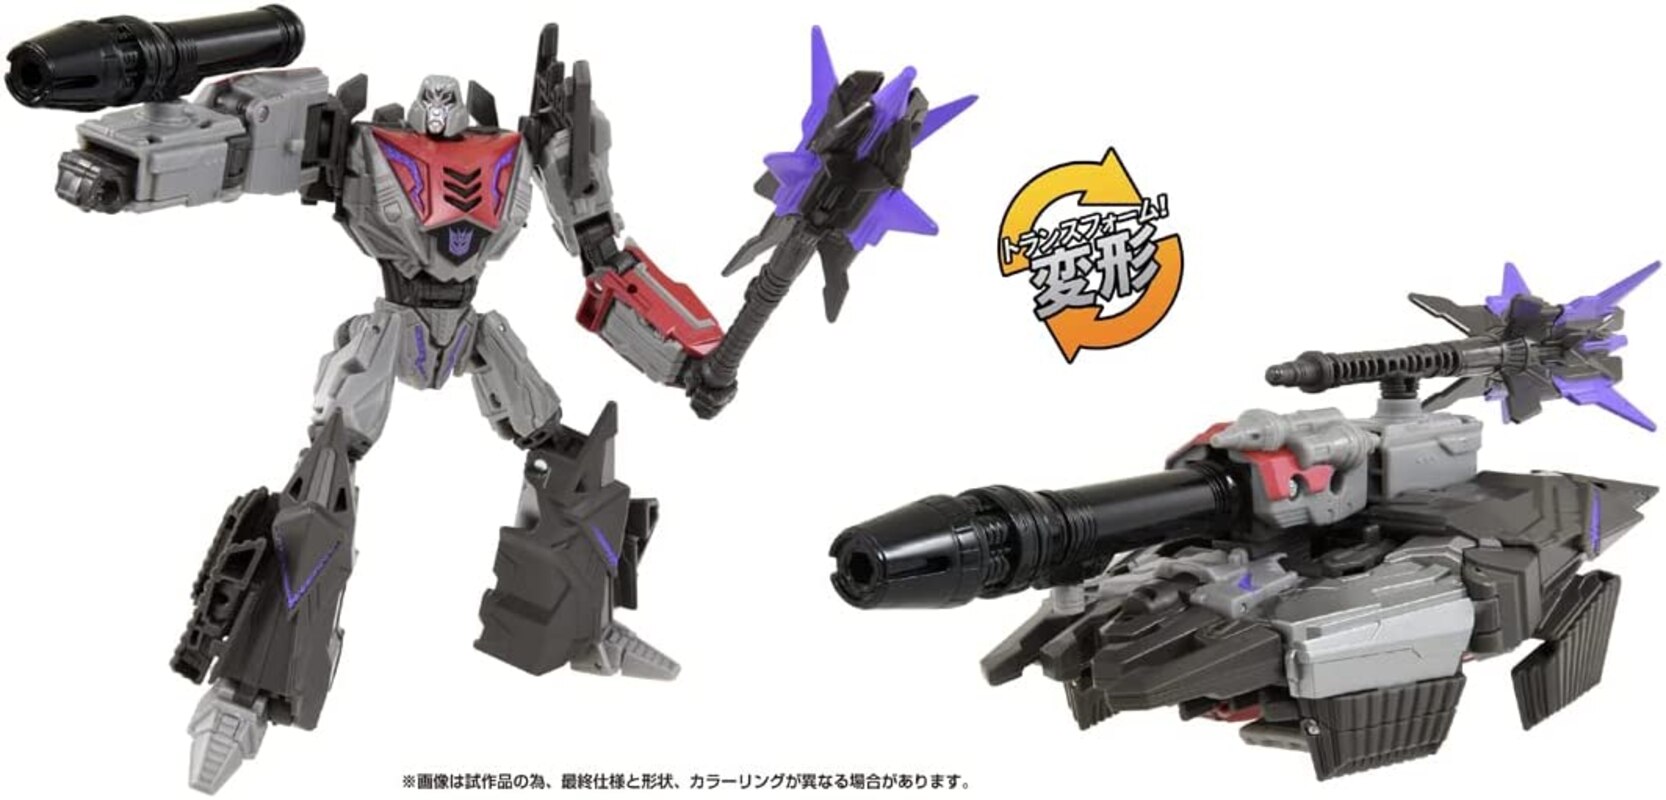 Gamer Edition Megatron & Cliffjumper New Official Images of Takara TOMY Studio Series Toys